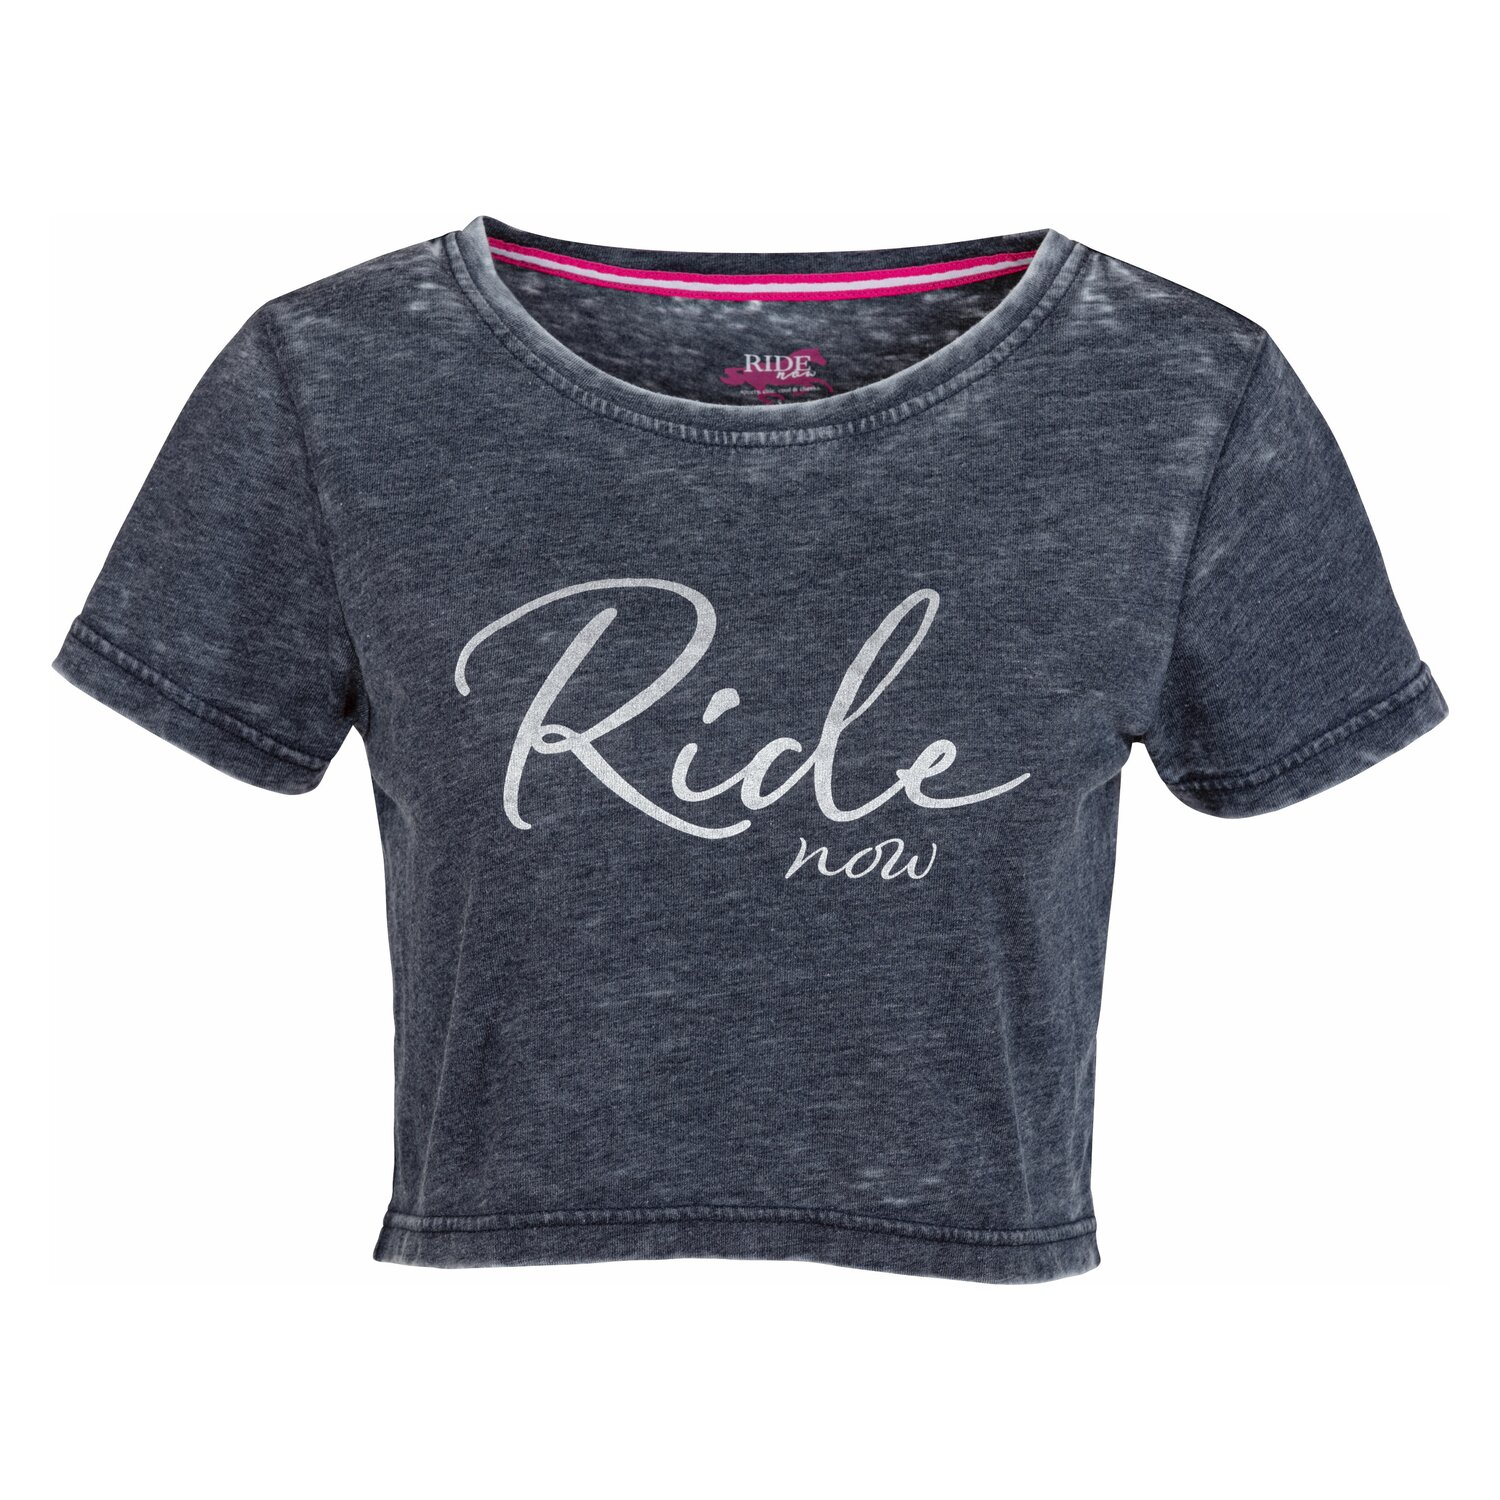 RIDE now T-Shirt Cropped Toowoomba 